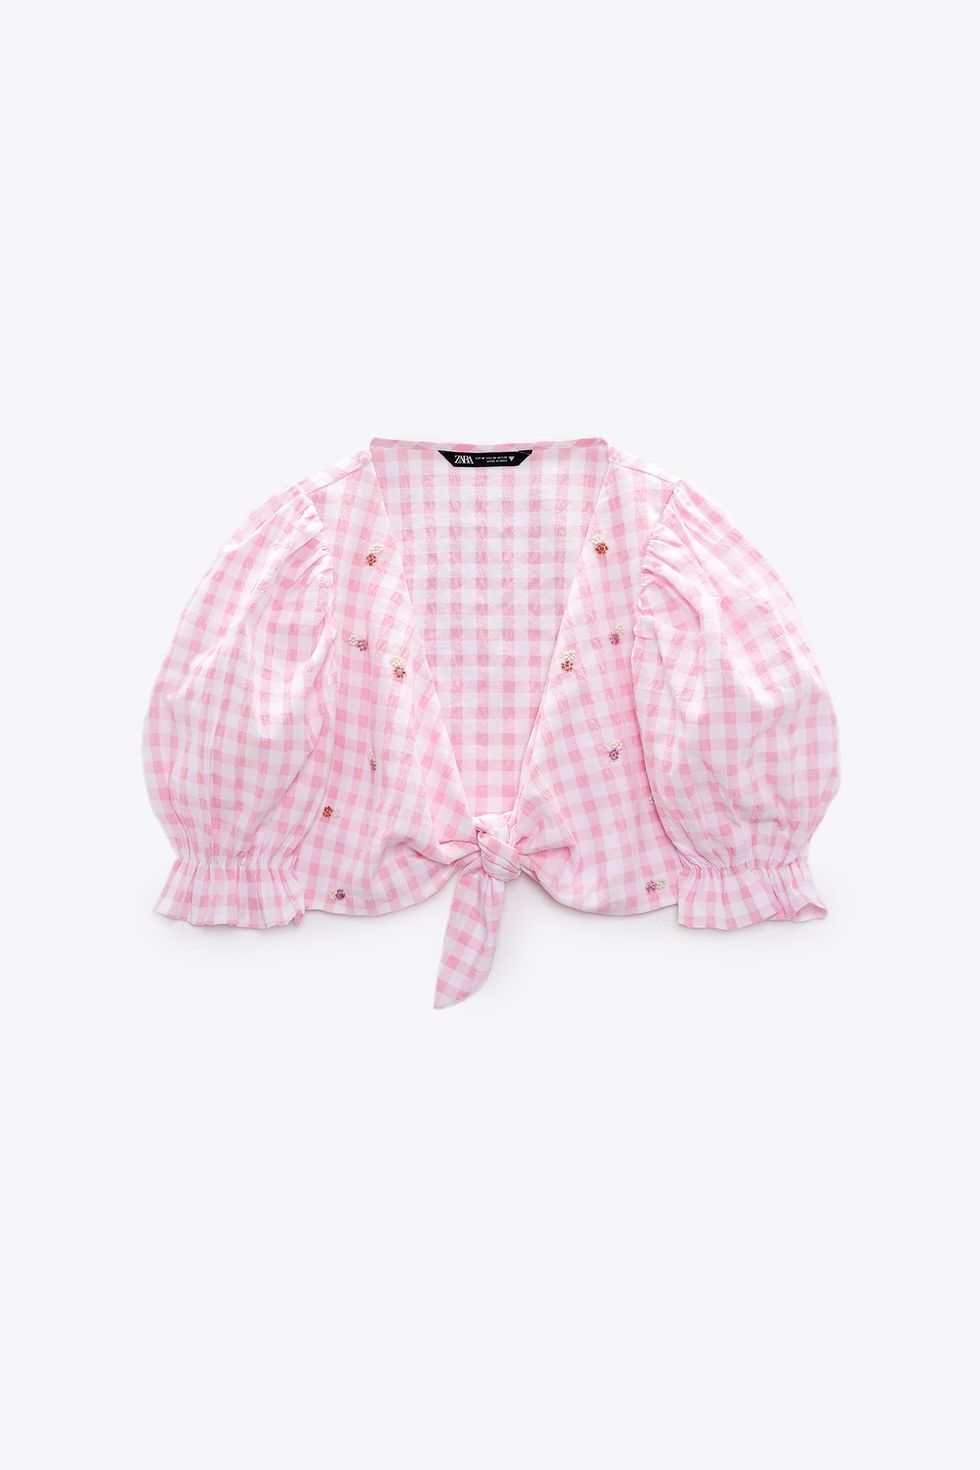 Kate Middleton's Pink Gingham Brora Blouse Is Available for Pre-Order ...